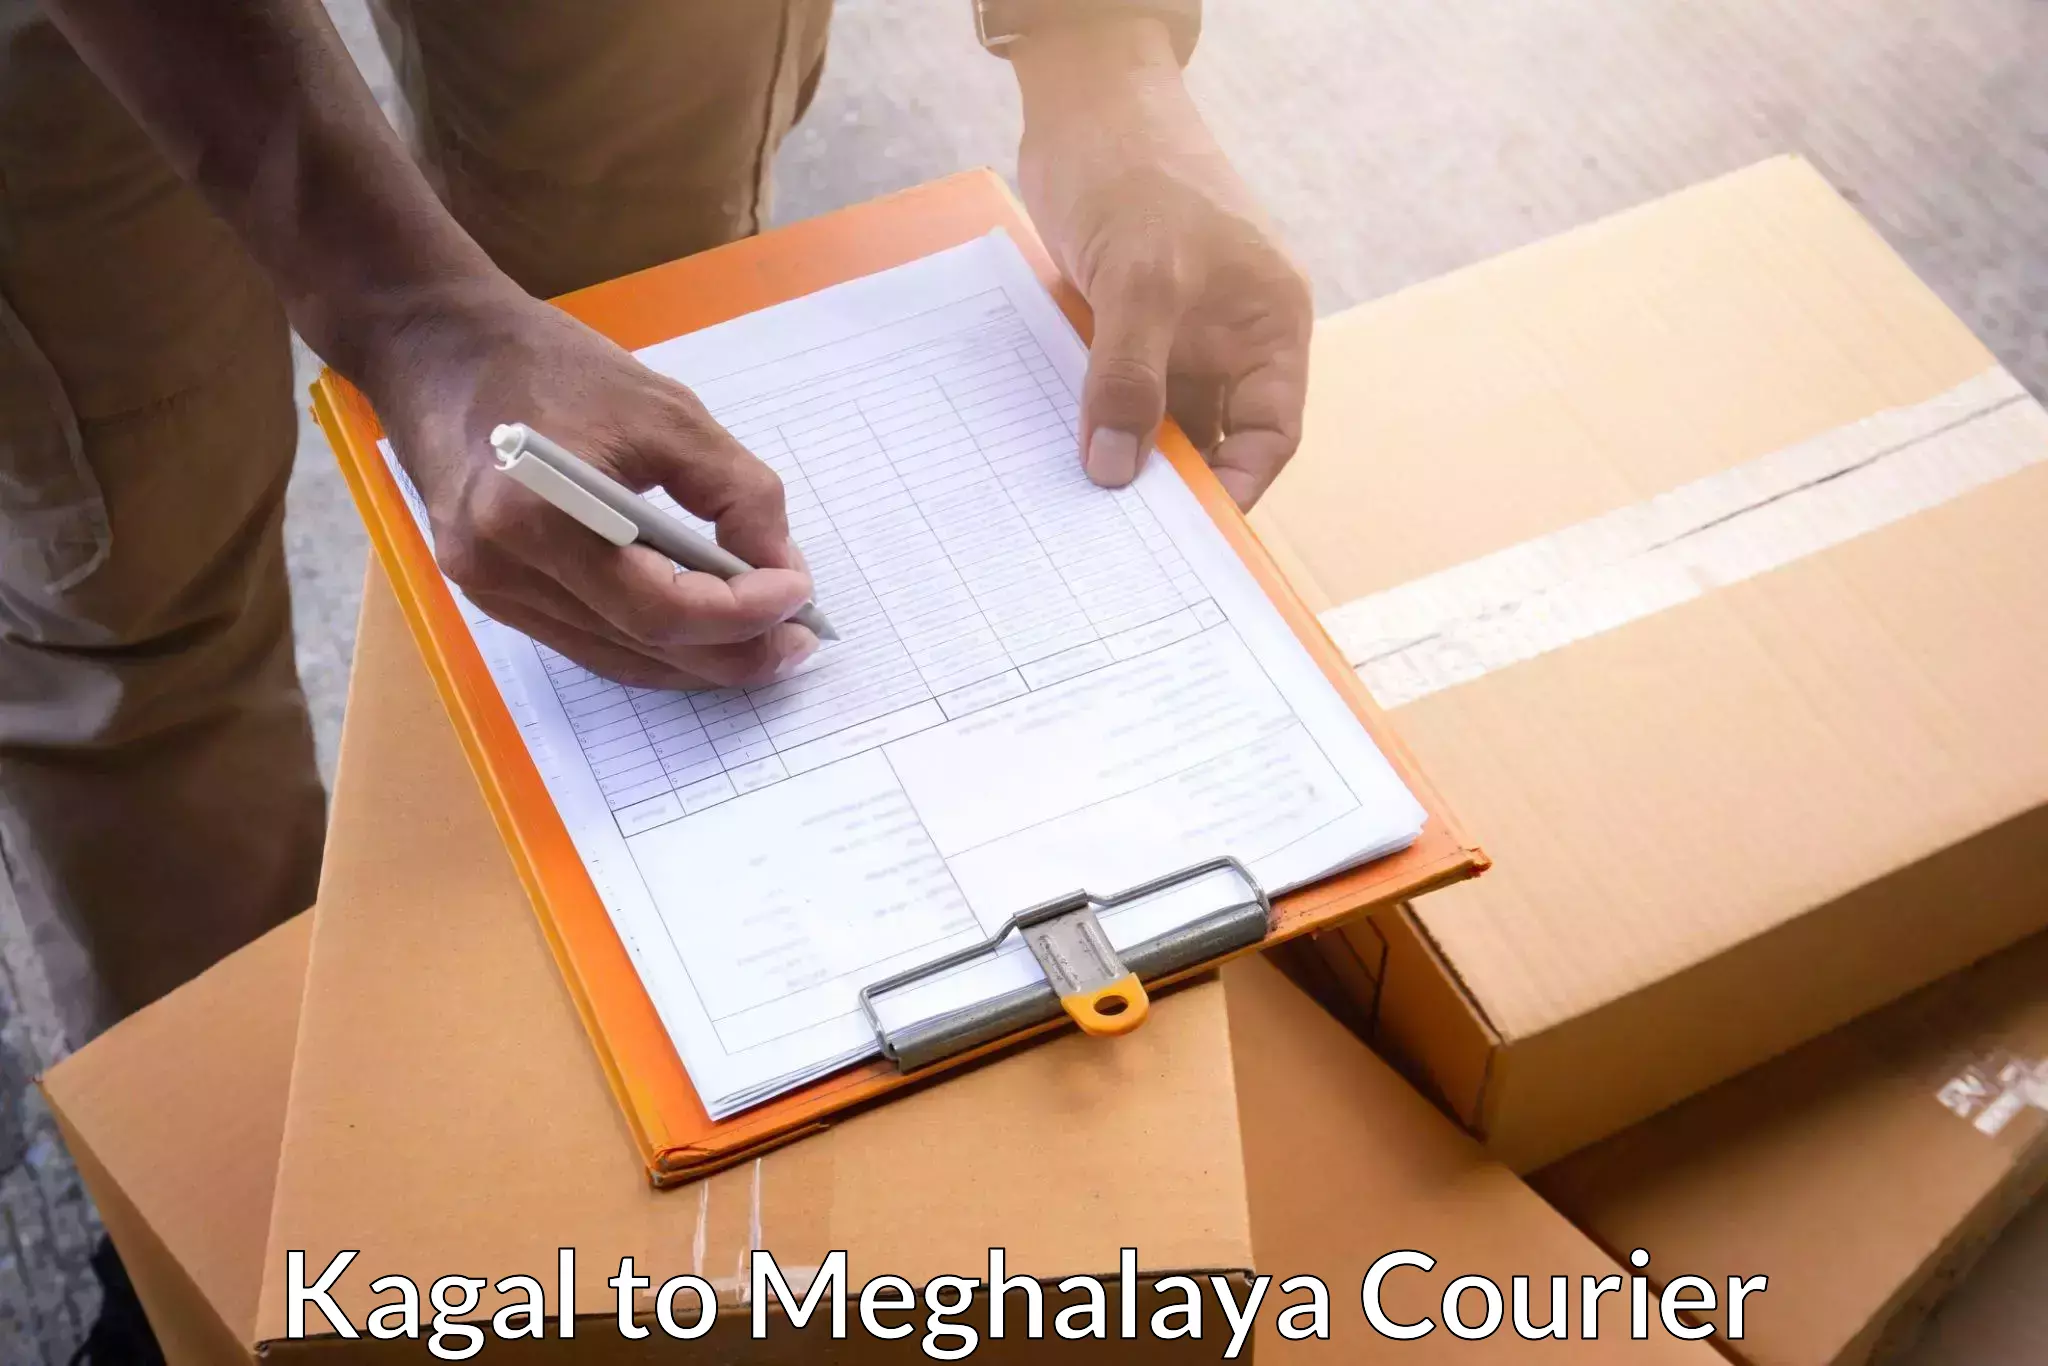 Global shipping solutions in Kagal to Meghalaya